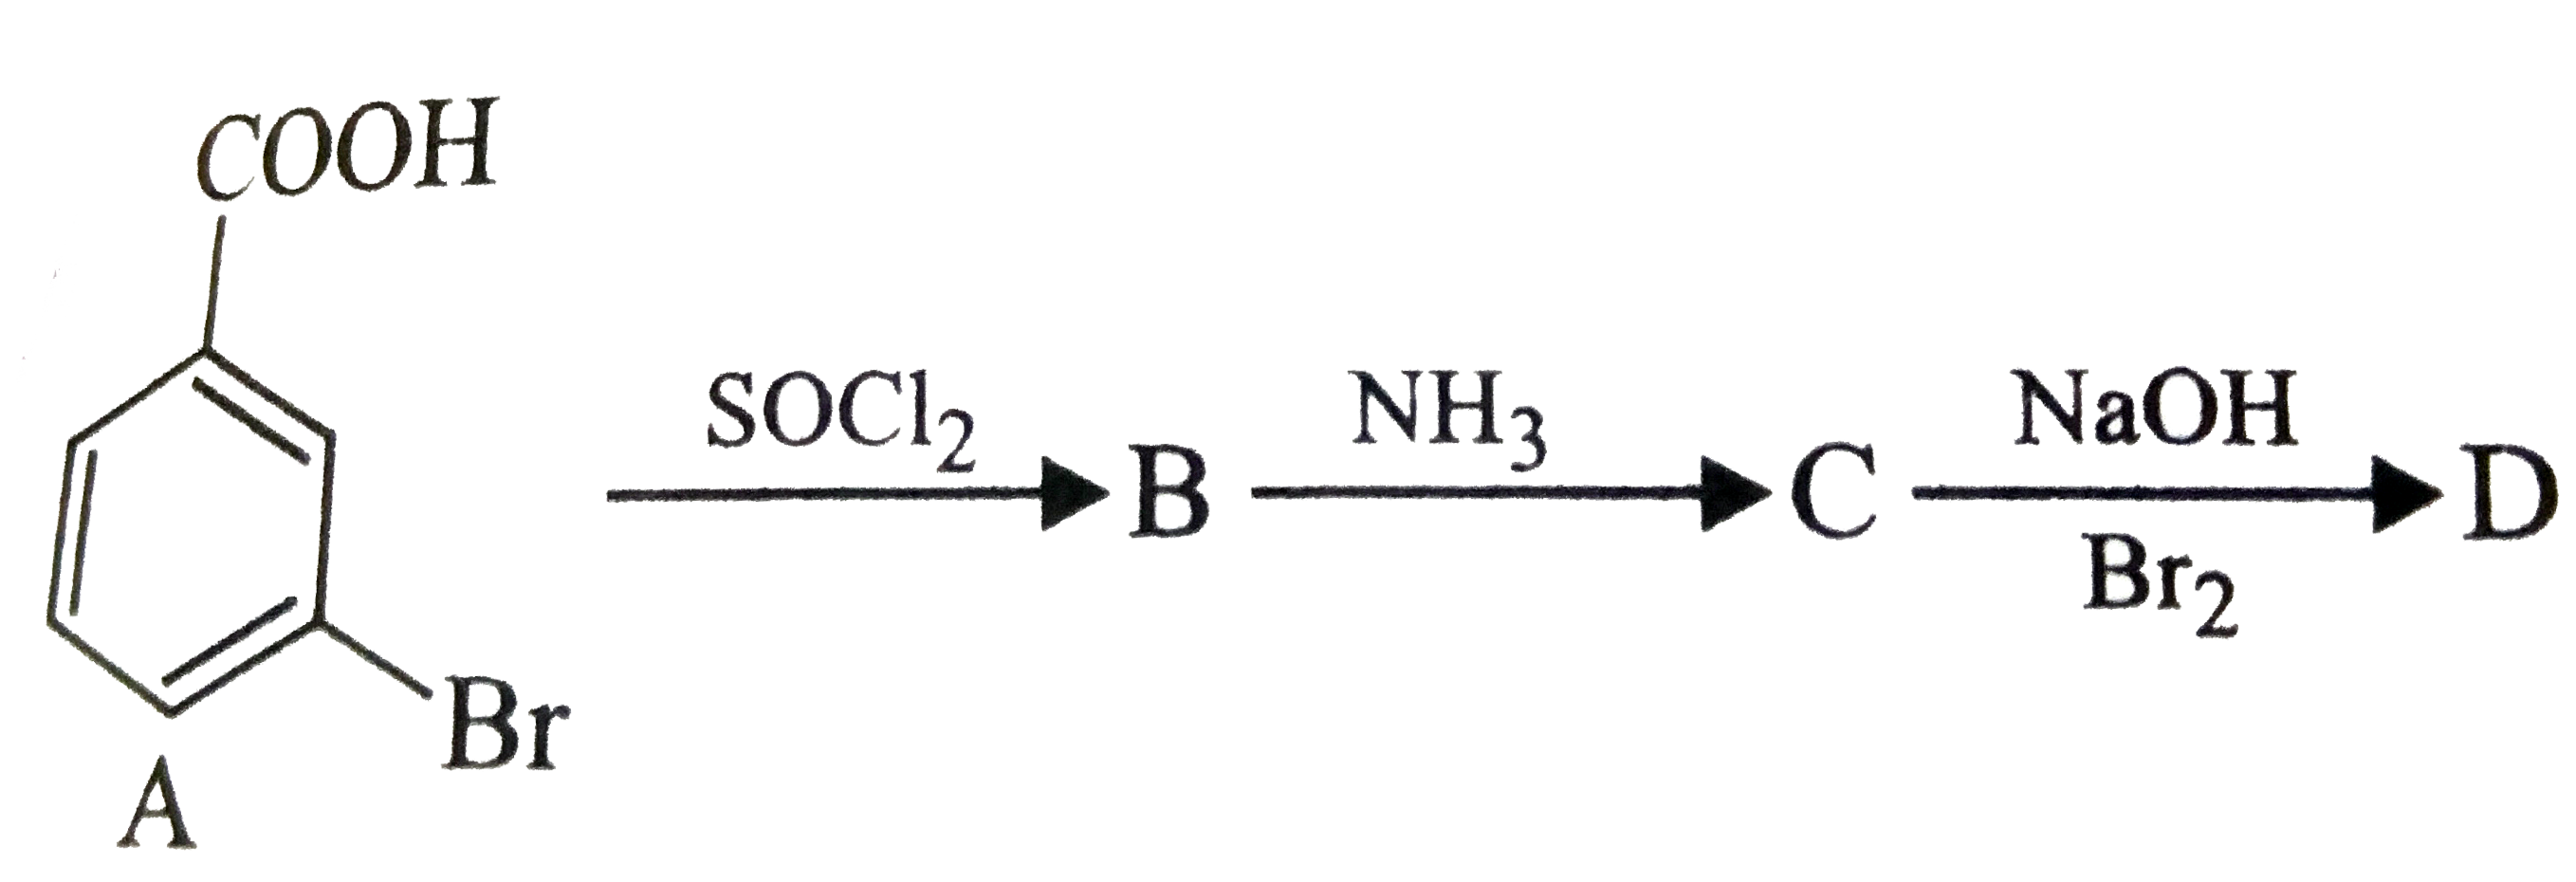 In a set of reactions, m-bromobenzoic acid gave a product D. identify the product D.